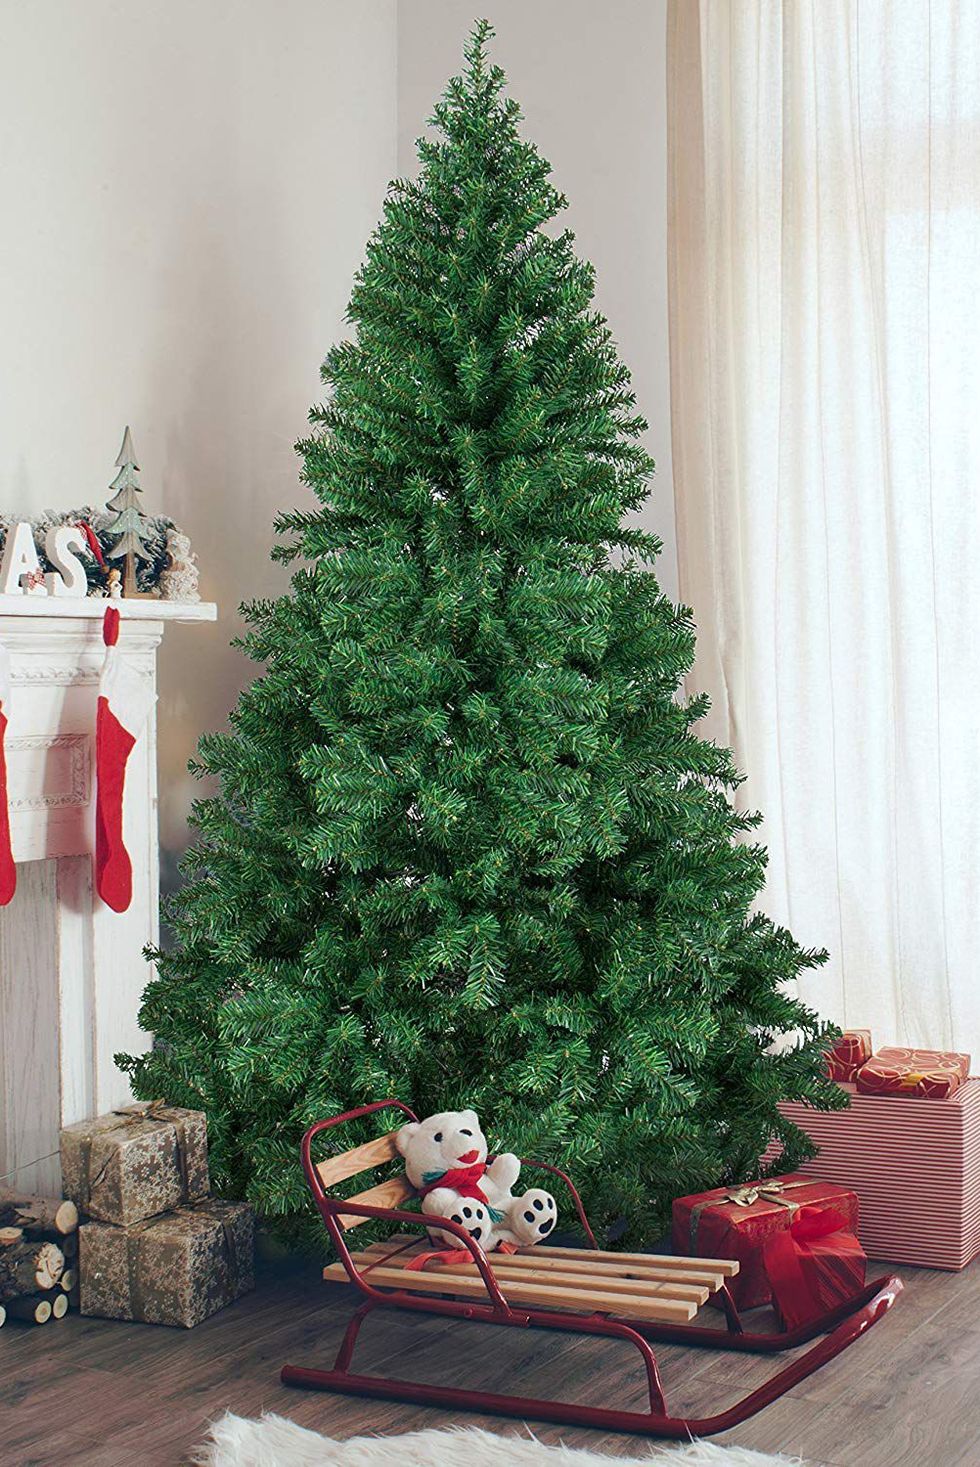 Can't decide on a real vs. fake Christmas tree? Try one of these